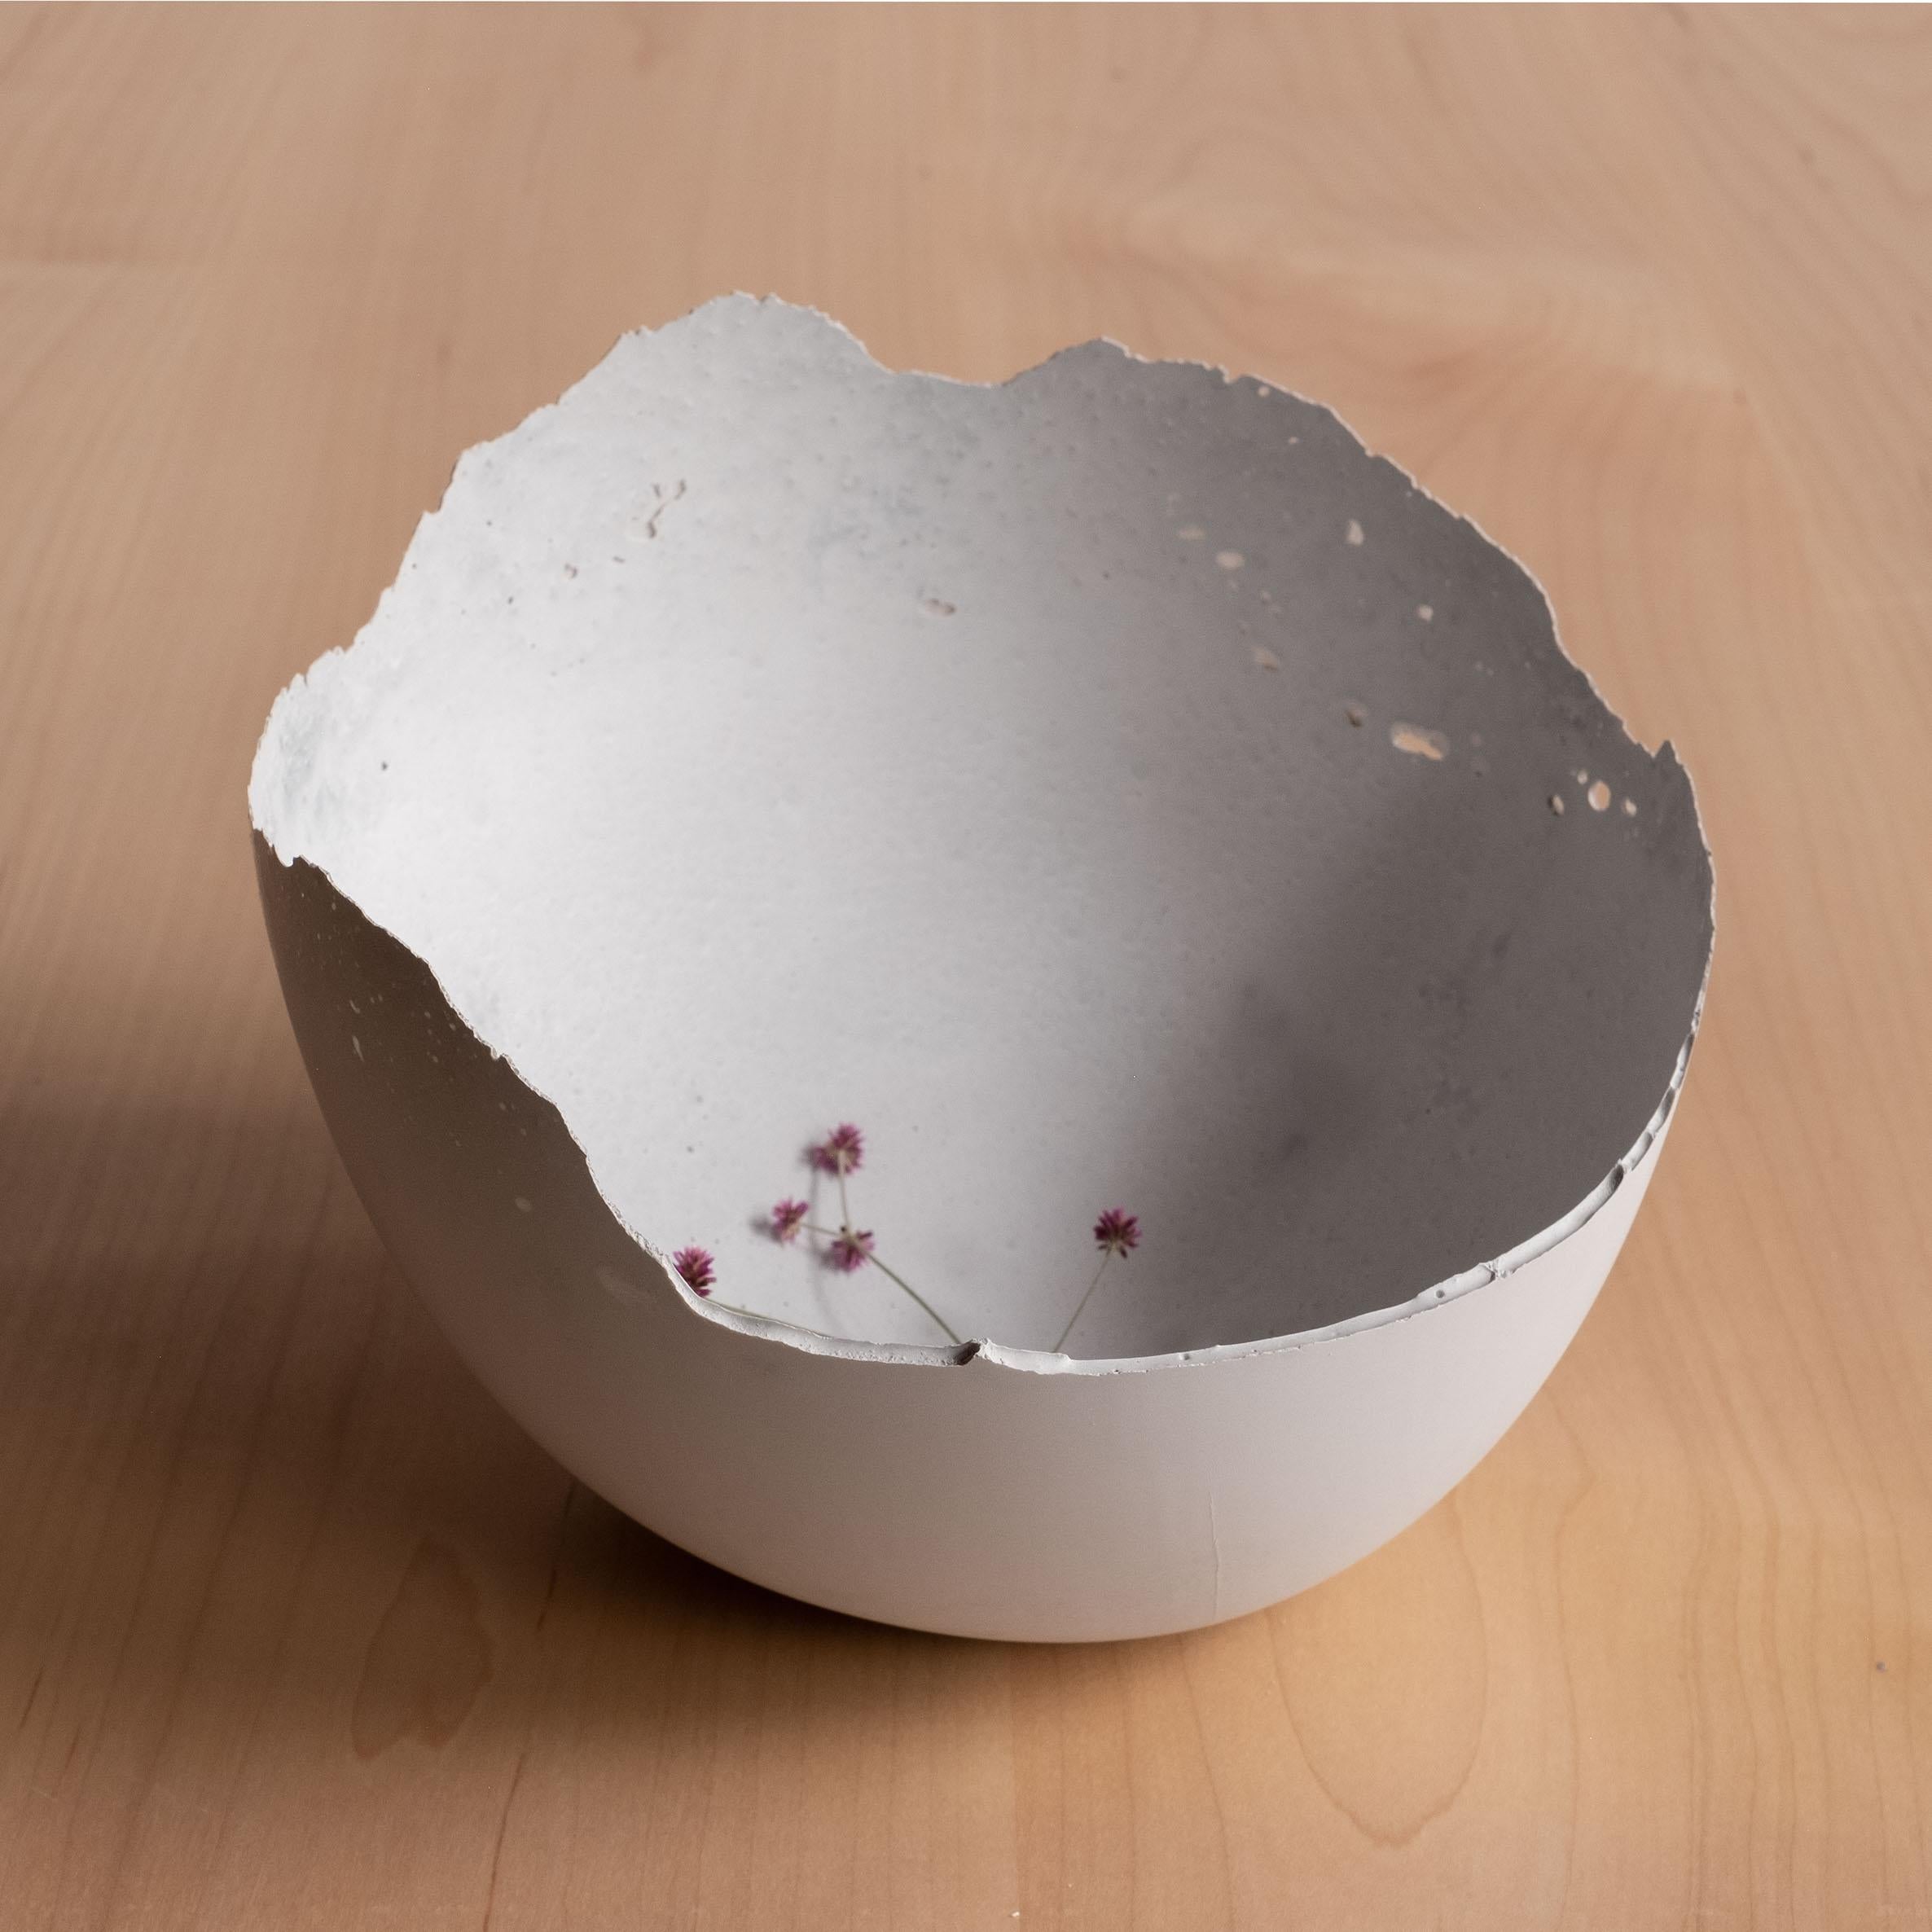 Handmade Cast Concrete Bowl in Grey by UME Studio In New Condition For Sale In Oakland, CA